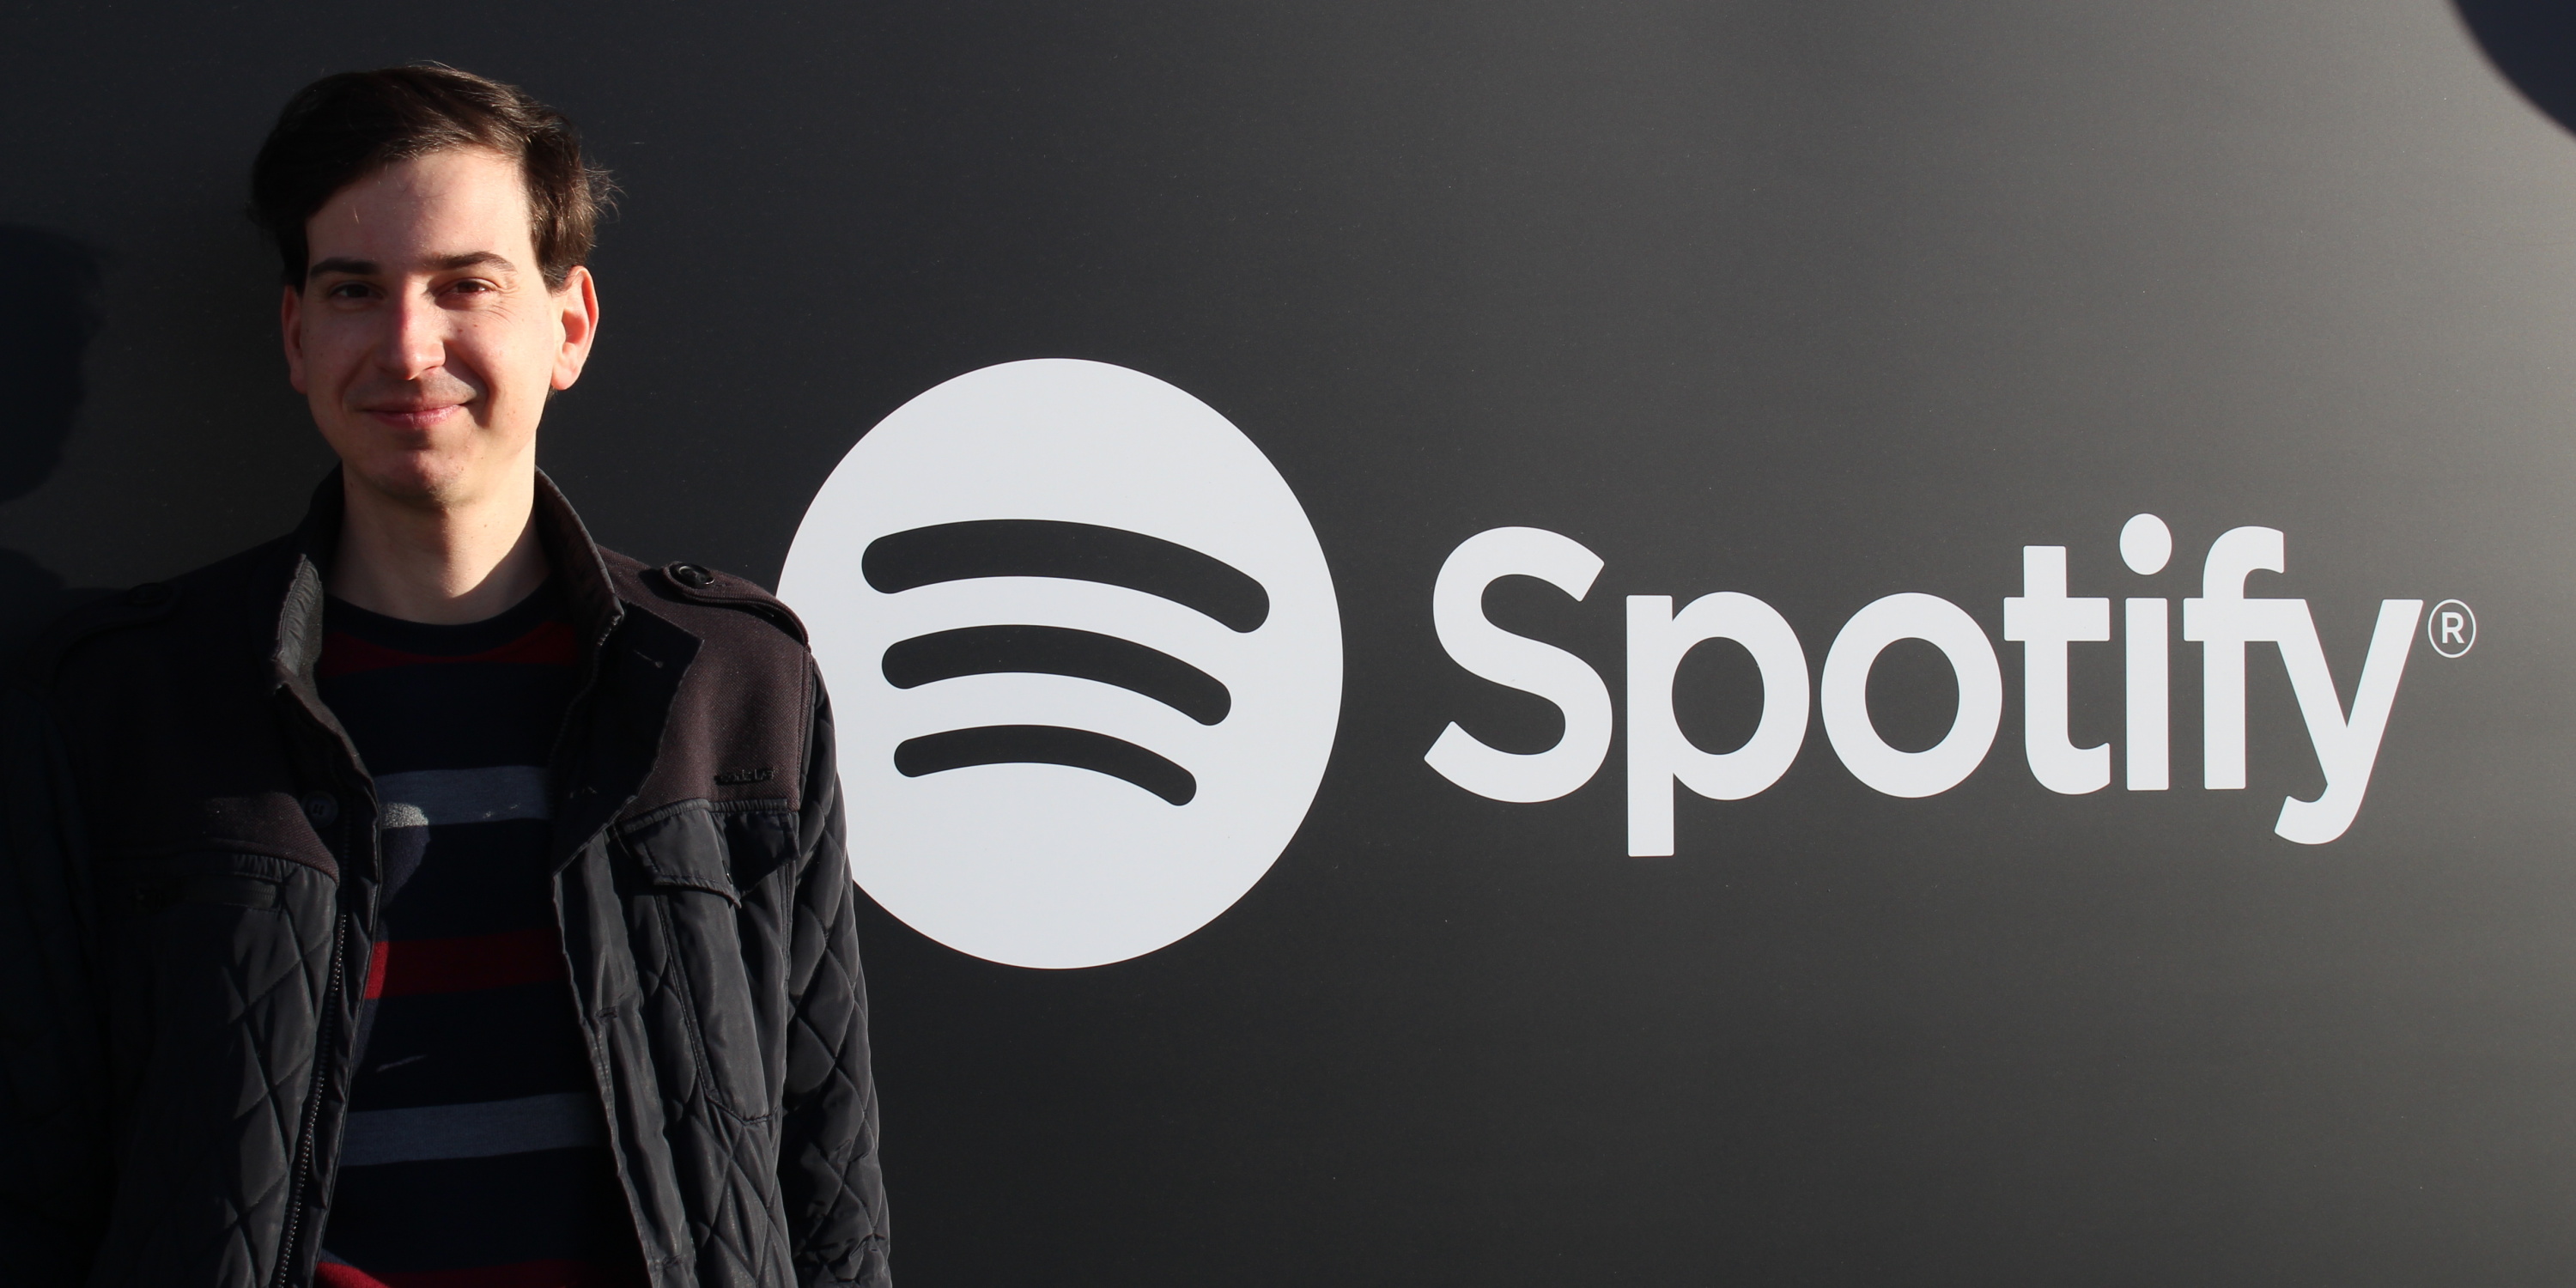 From iPumpuj to Spotify: how university project opened doors for MU graduate